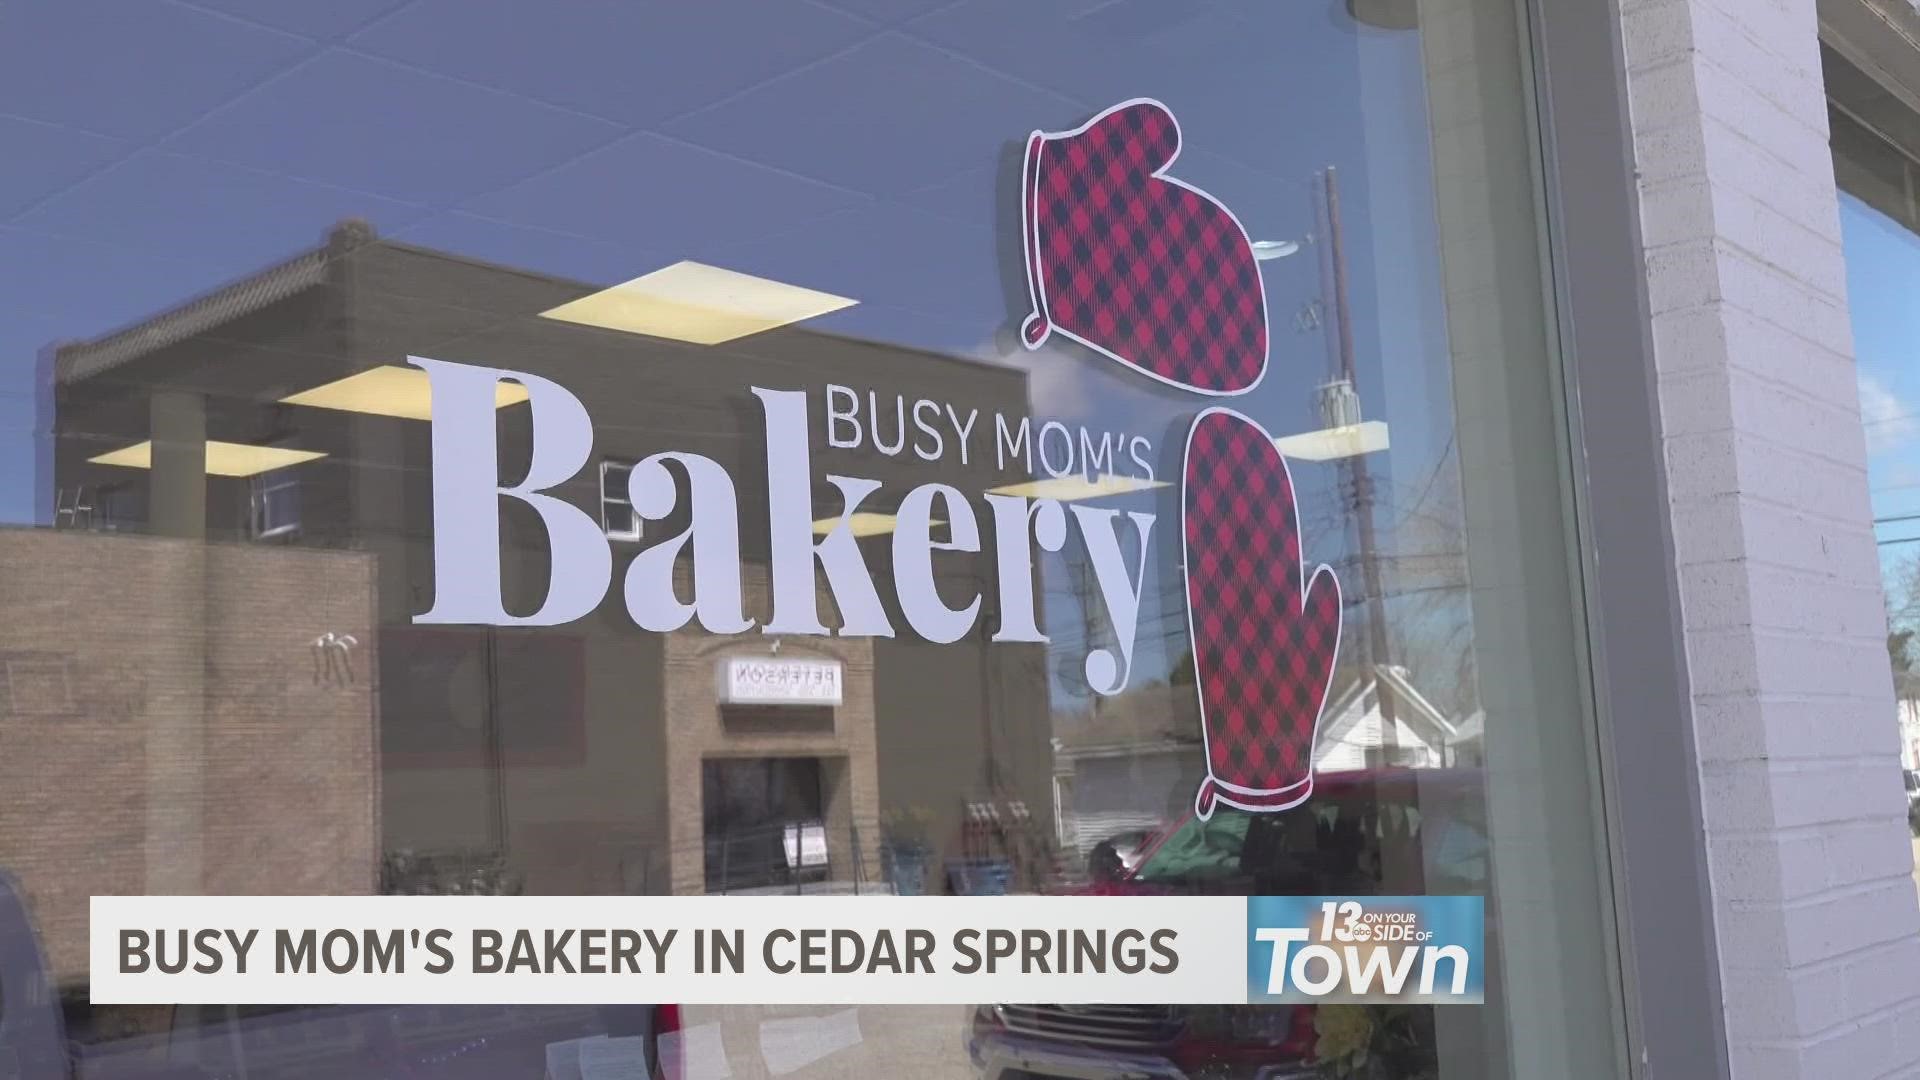 "Busy Mom's Bakery" first opened its doors just one week before the state shutdown at the start of pandemic.